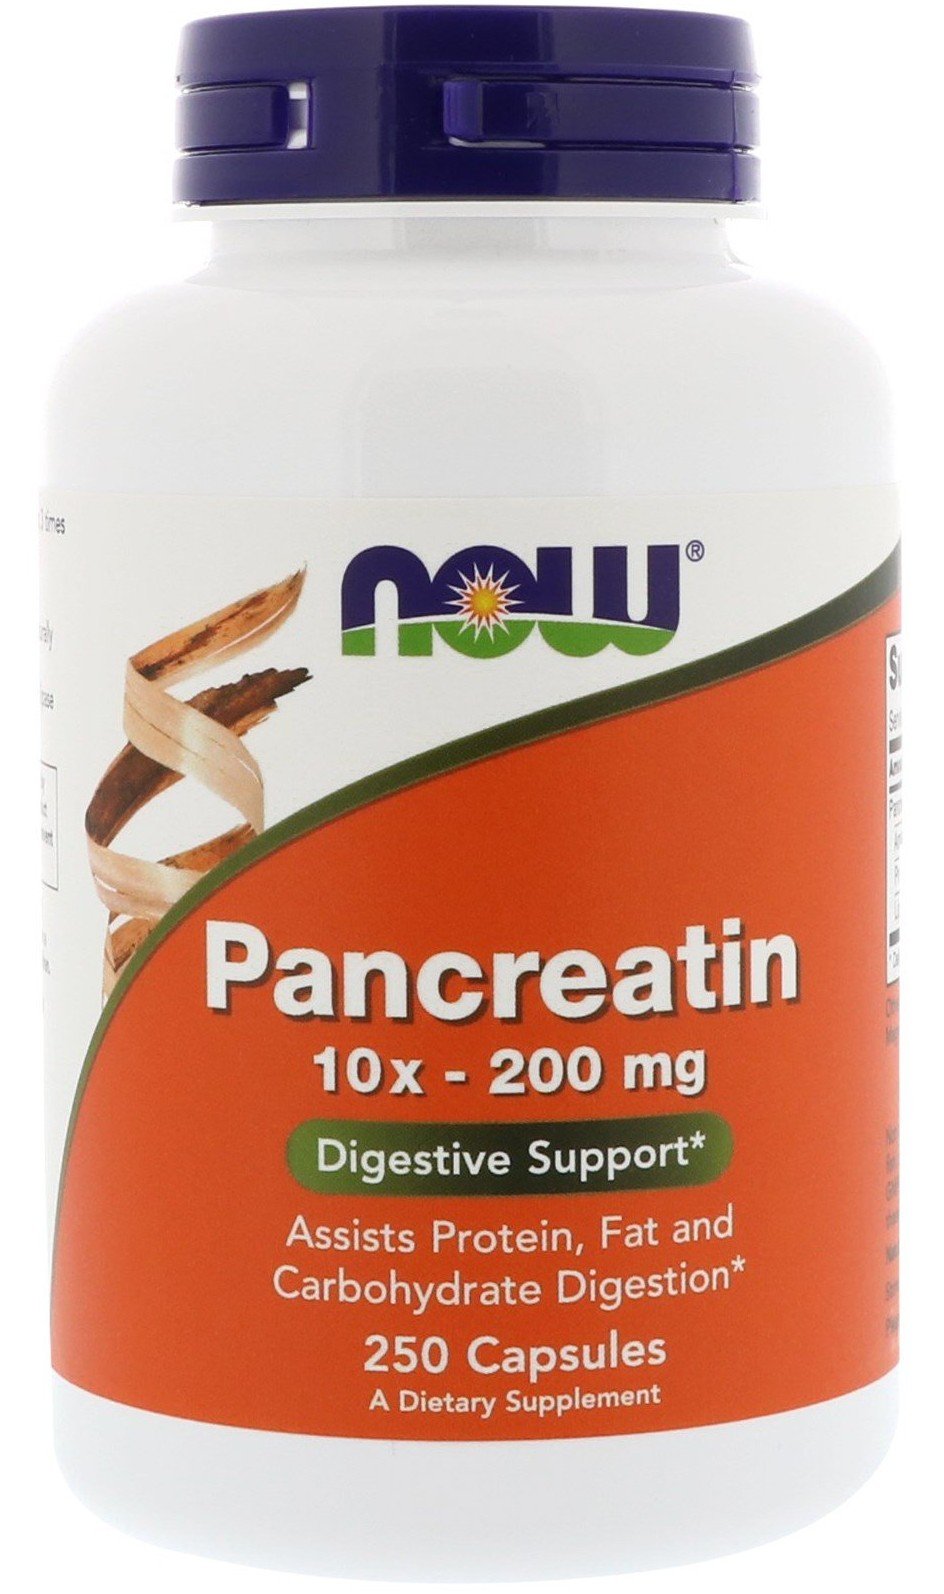 Pancreatin 10X - 200 mg, 250 pcs, Now. Special supplements. 